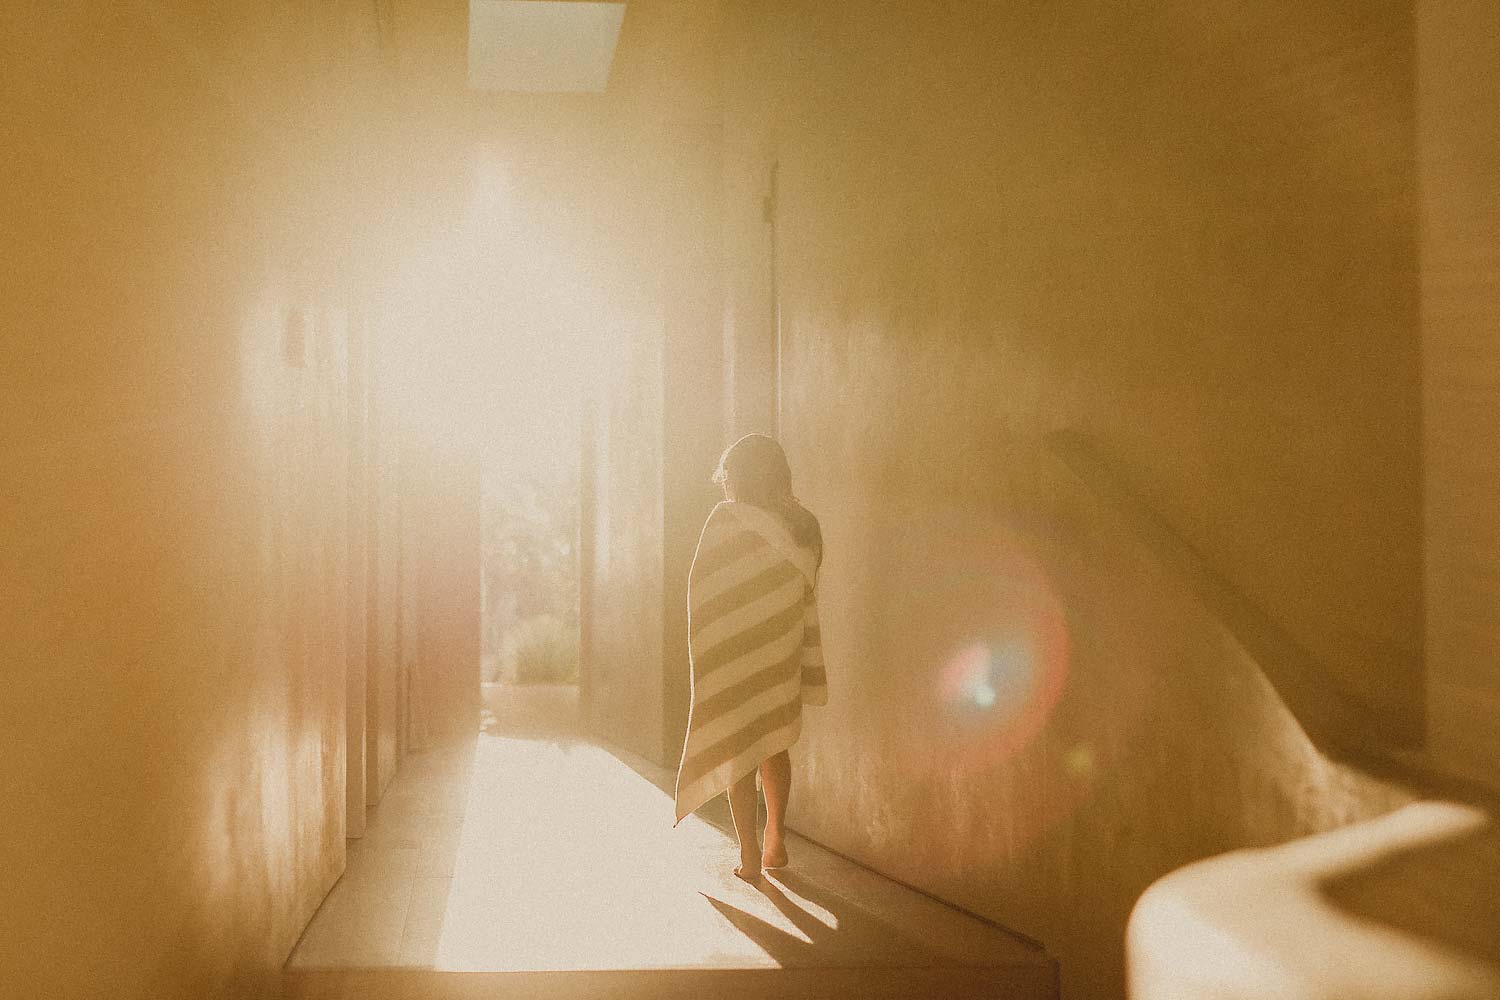 Family-photographer-sydney-young-child-facing-away-from-camera-walks-down-hallway-being-illuminated-by-golden-rays-from-the-sun-streaming-through-window-at-the-end-pf-the-hallway